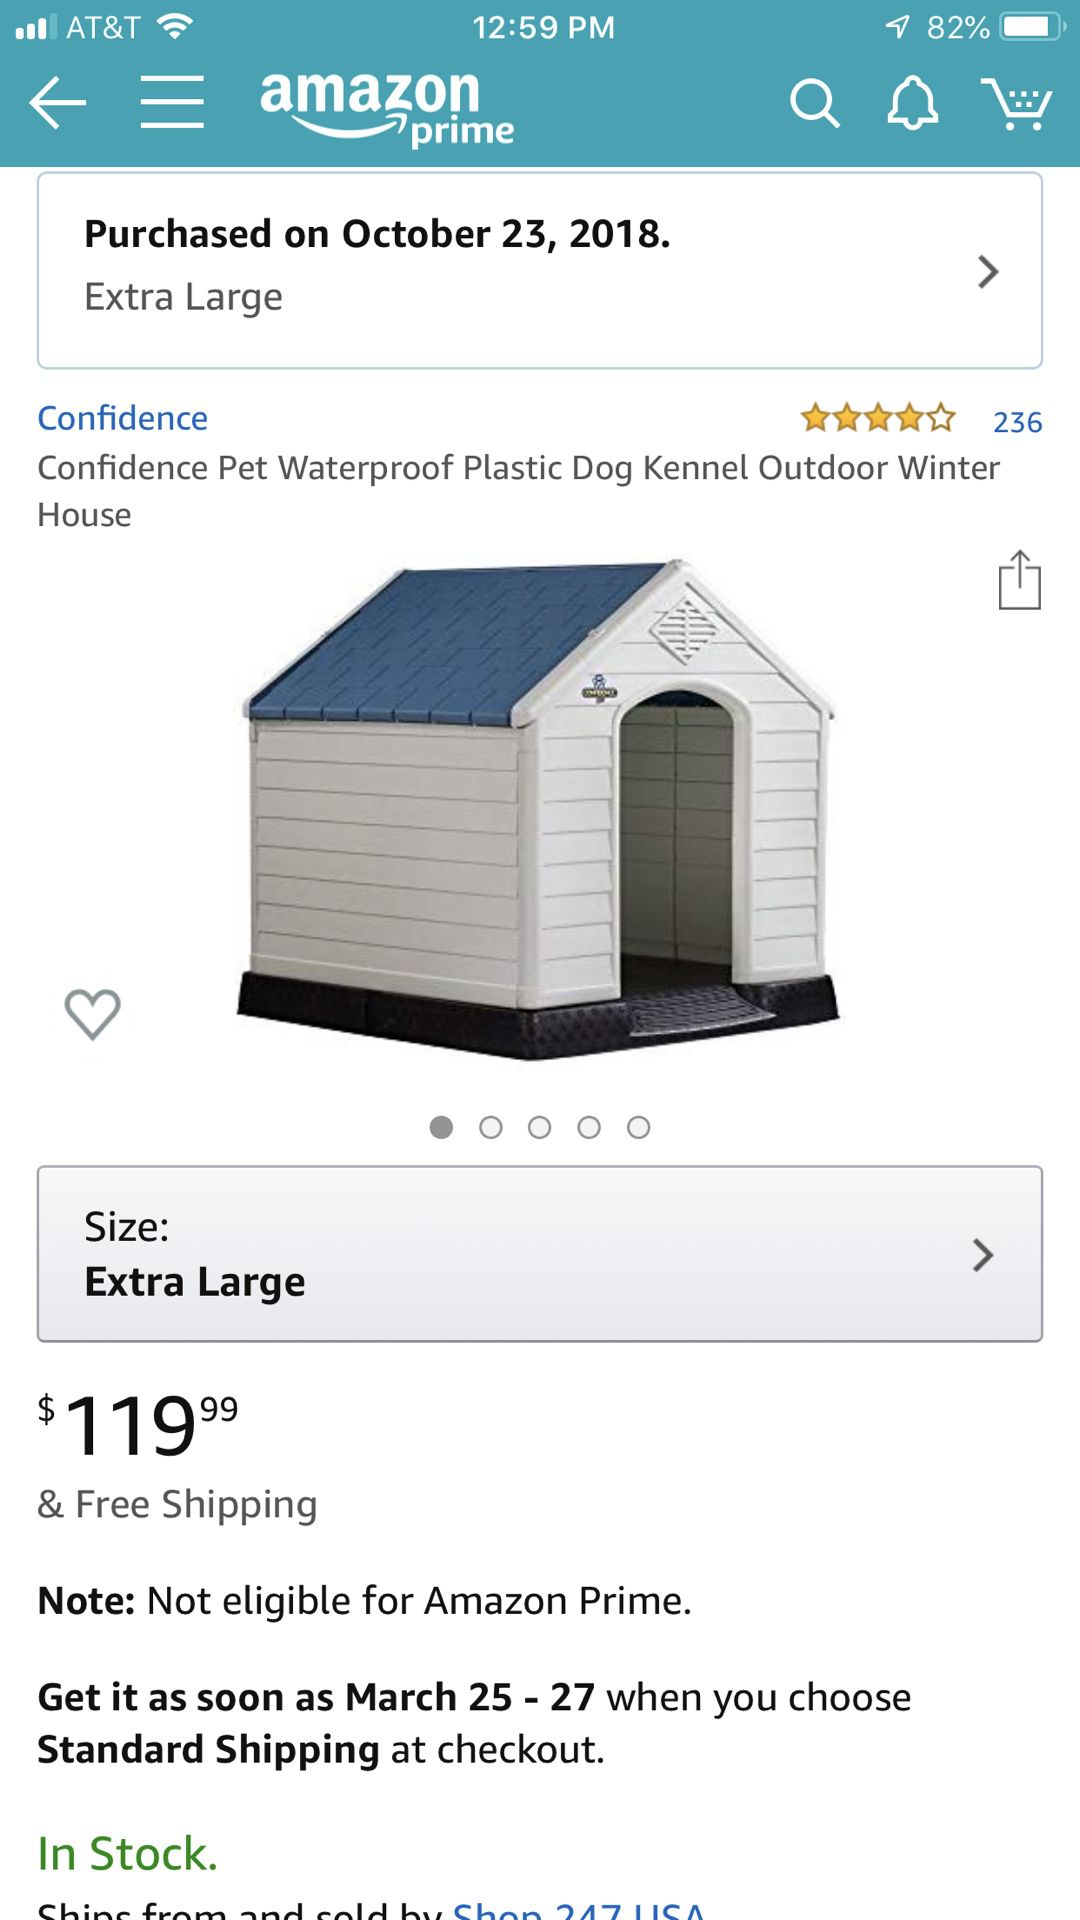 Large dog house also fits 2 20lb dogs.